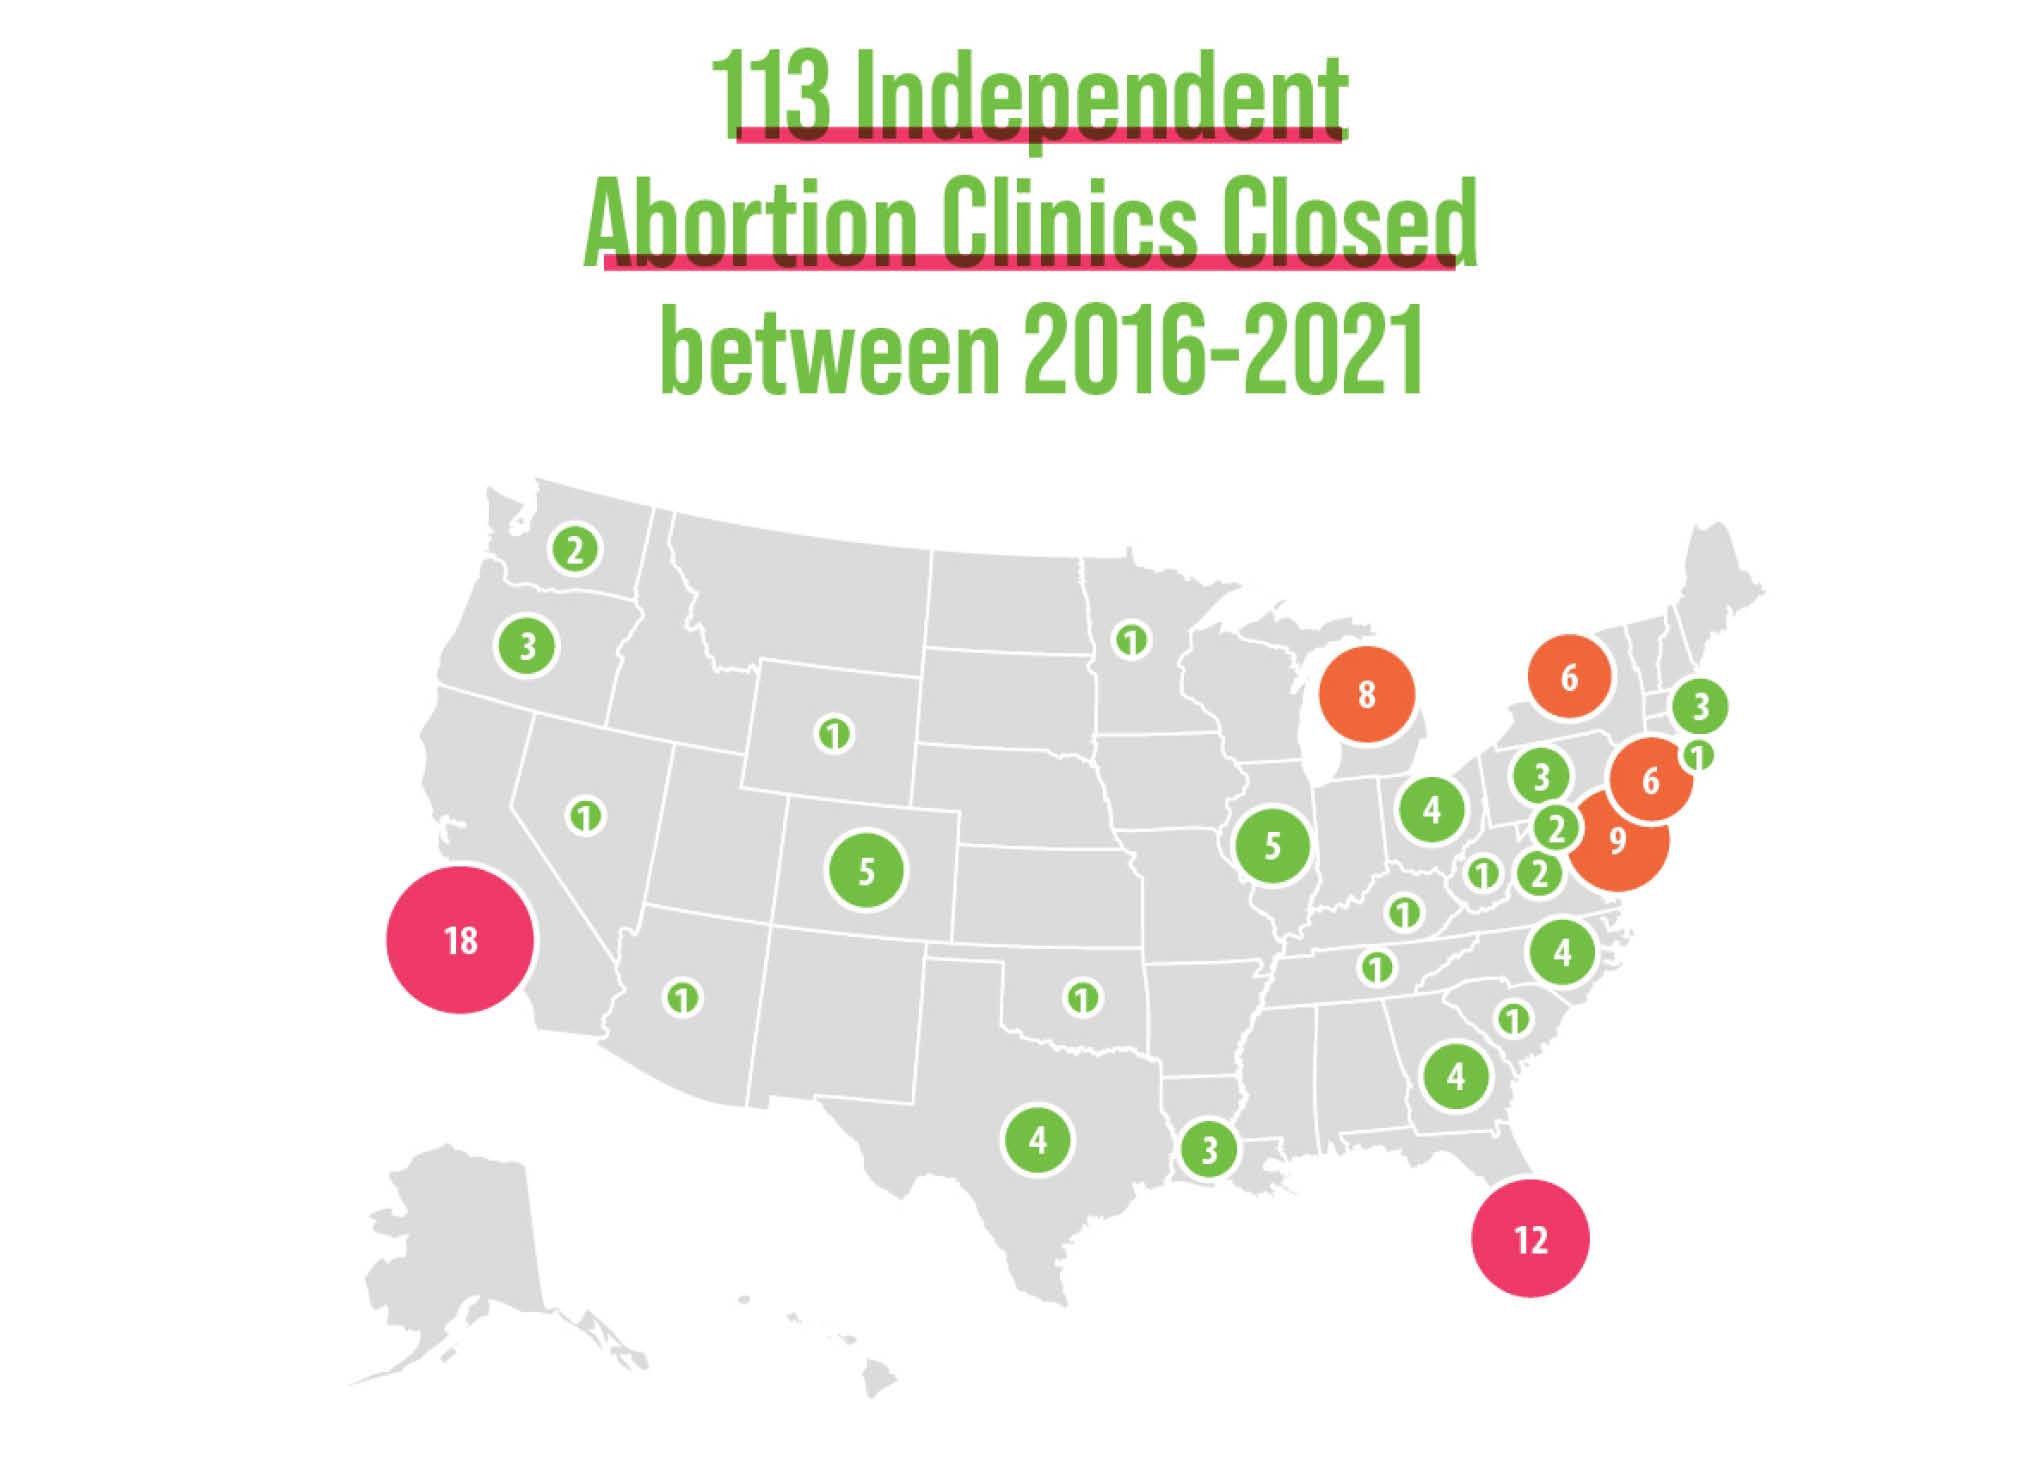 a data vizulaization titled: 113 Independent Abortion Clinics closed between 2016 and 2021. The vizulization shows a map of the U.S. showing which states have closed abortion clinics and how many clincs have closed in those state.